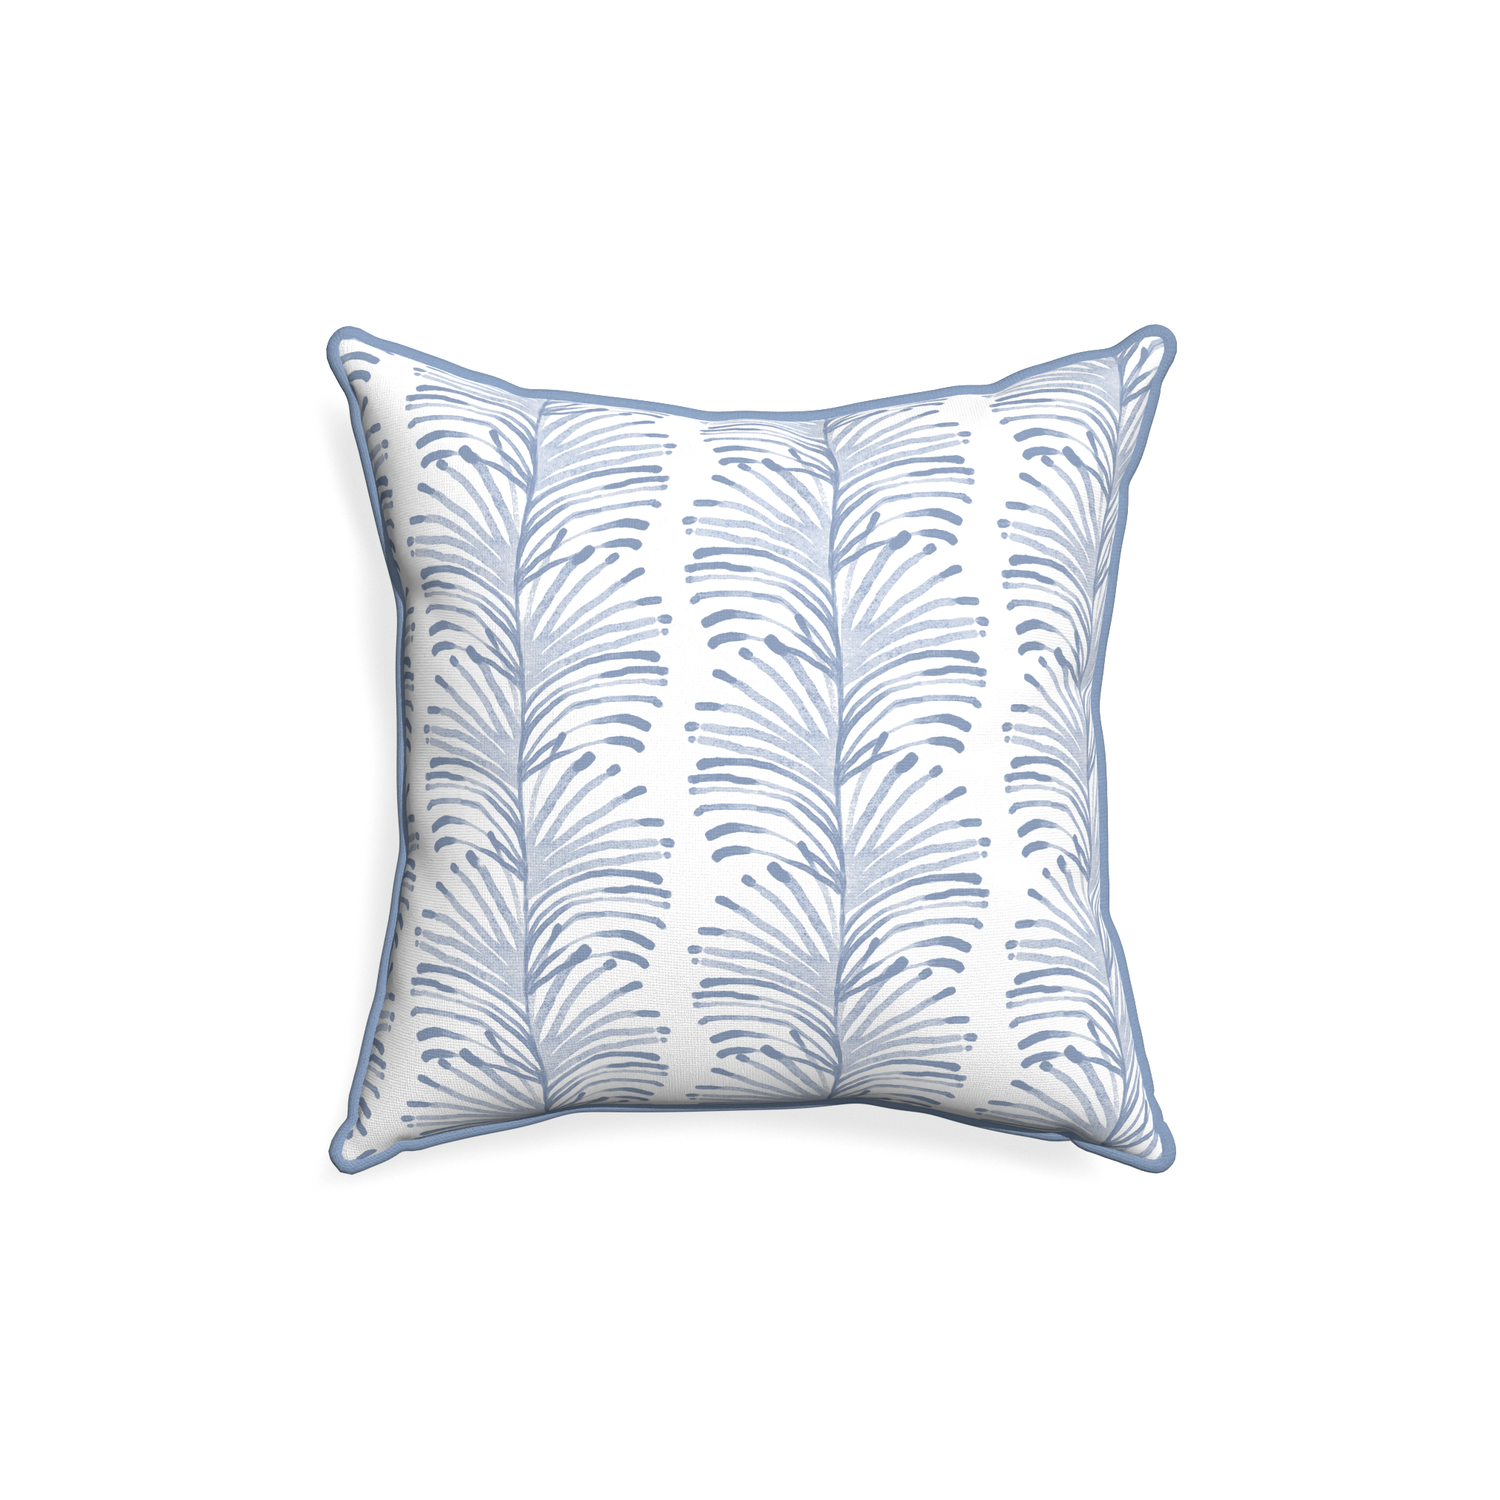 18-square emma sky custom sky blue botanical stripepillow with sky piping on white background